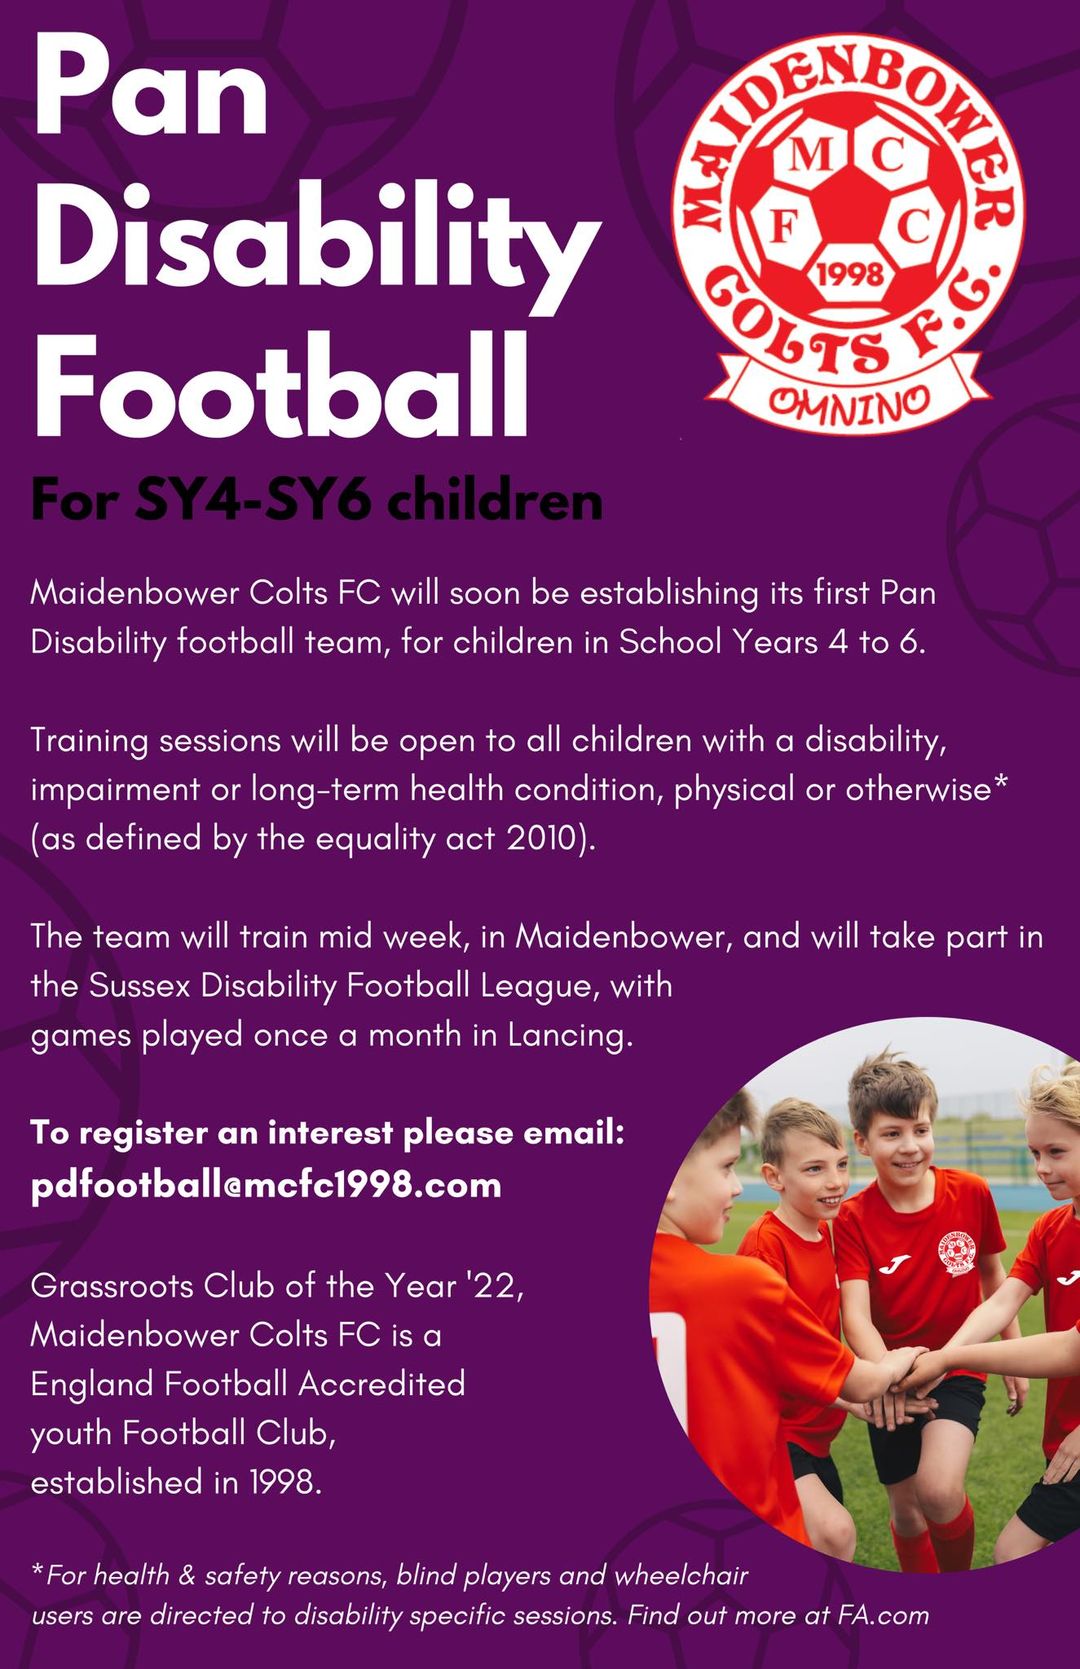 Pan Disability Football Sessions